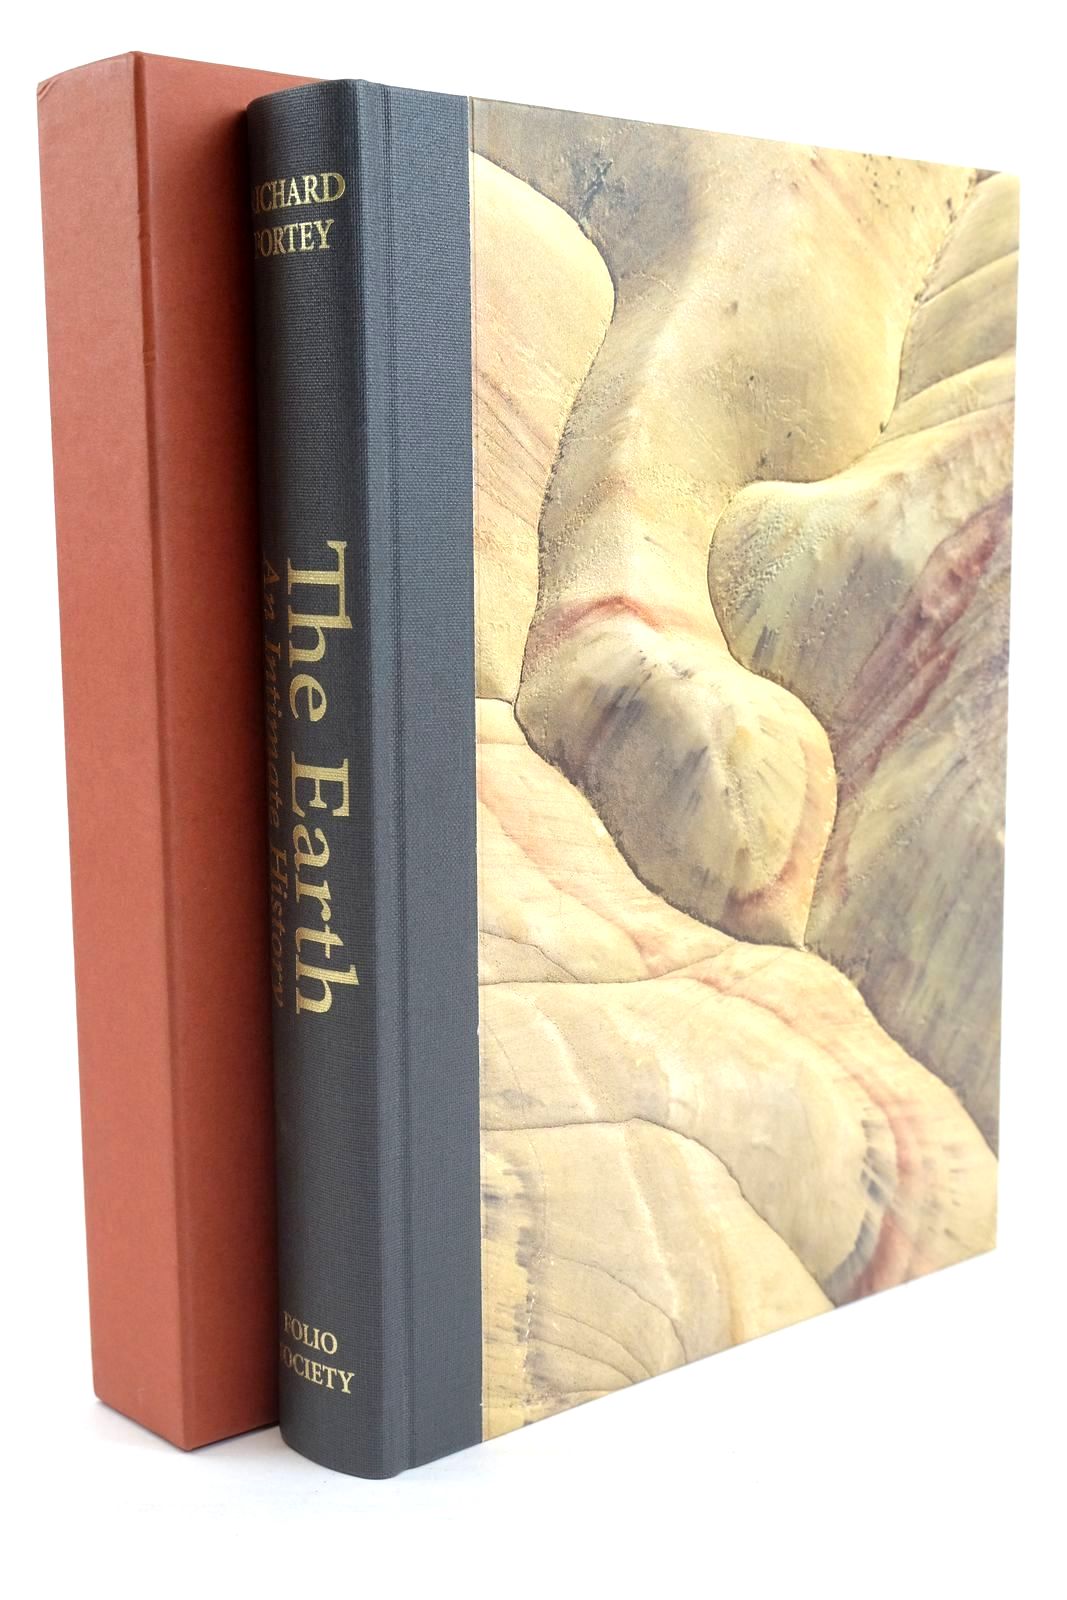 Photo of THE EARTH written by Fortey, Richard published by Folio Society (STOCK CODE: 1320134)  for sale by Stella & Rose's Books